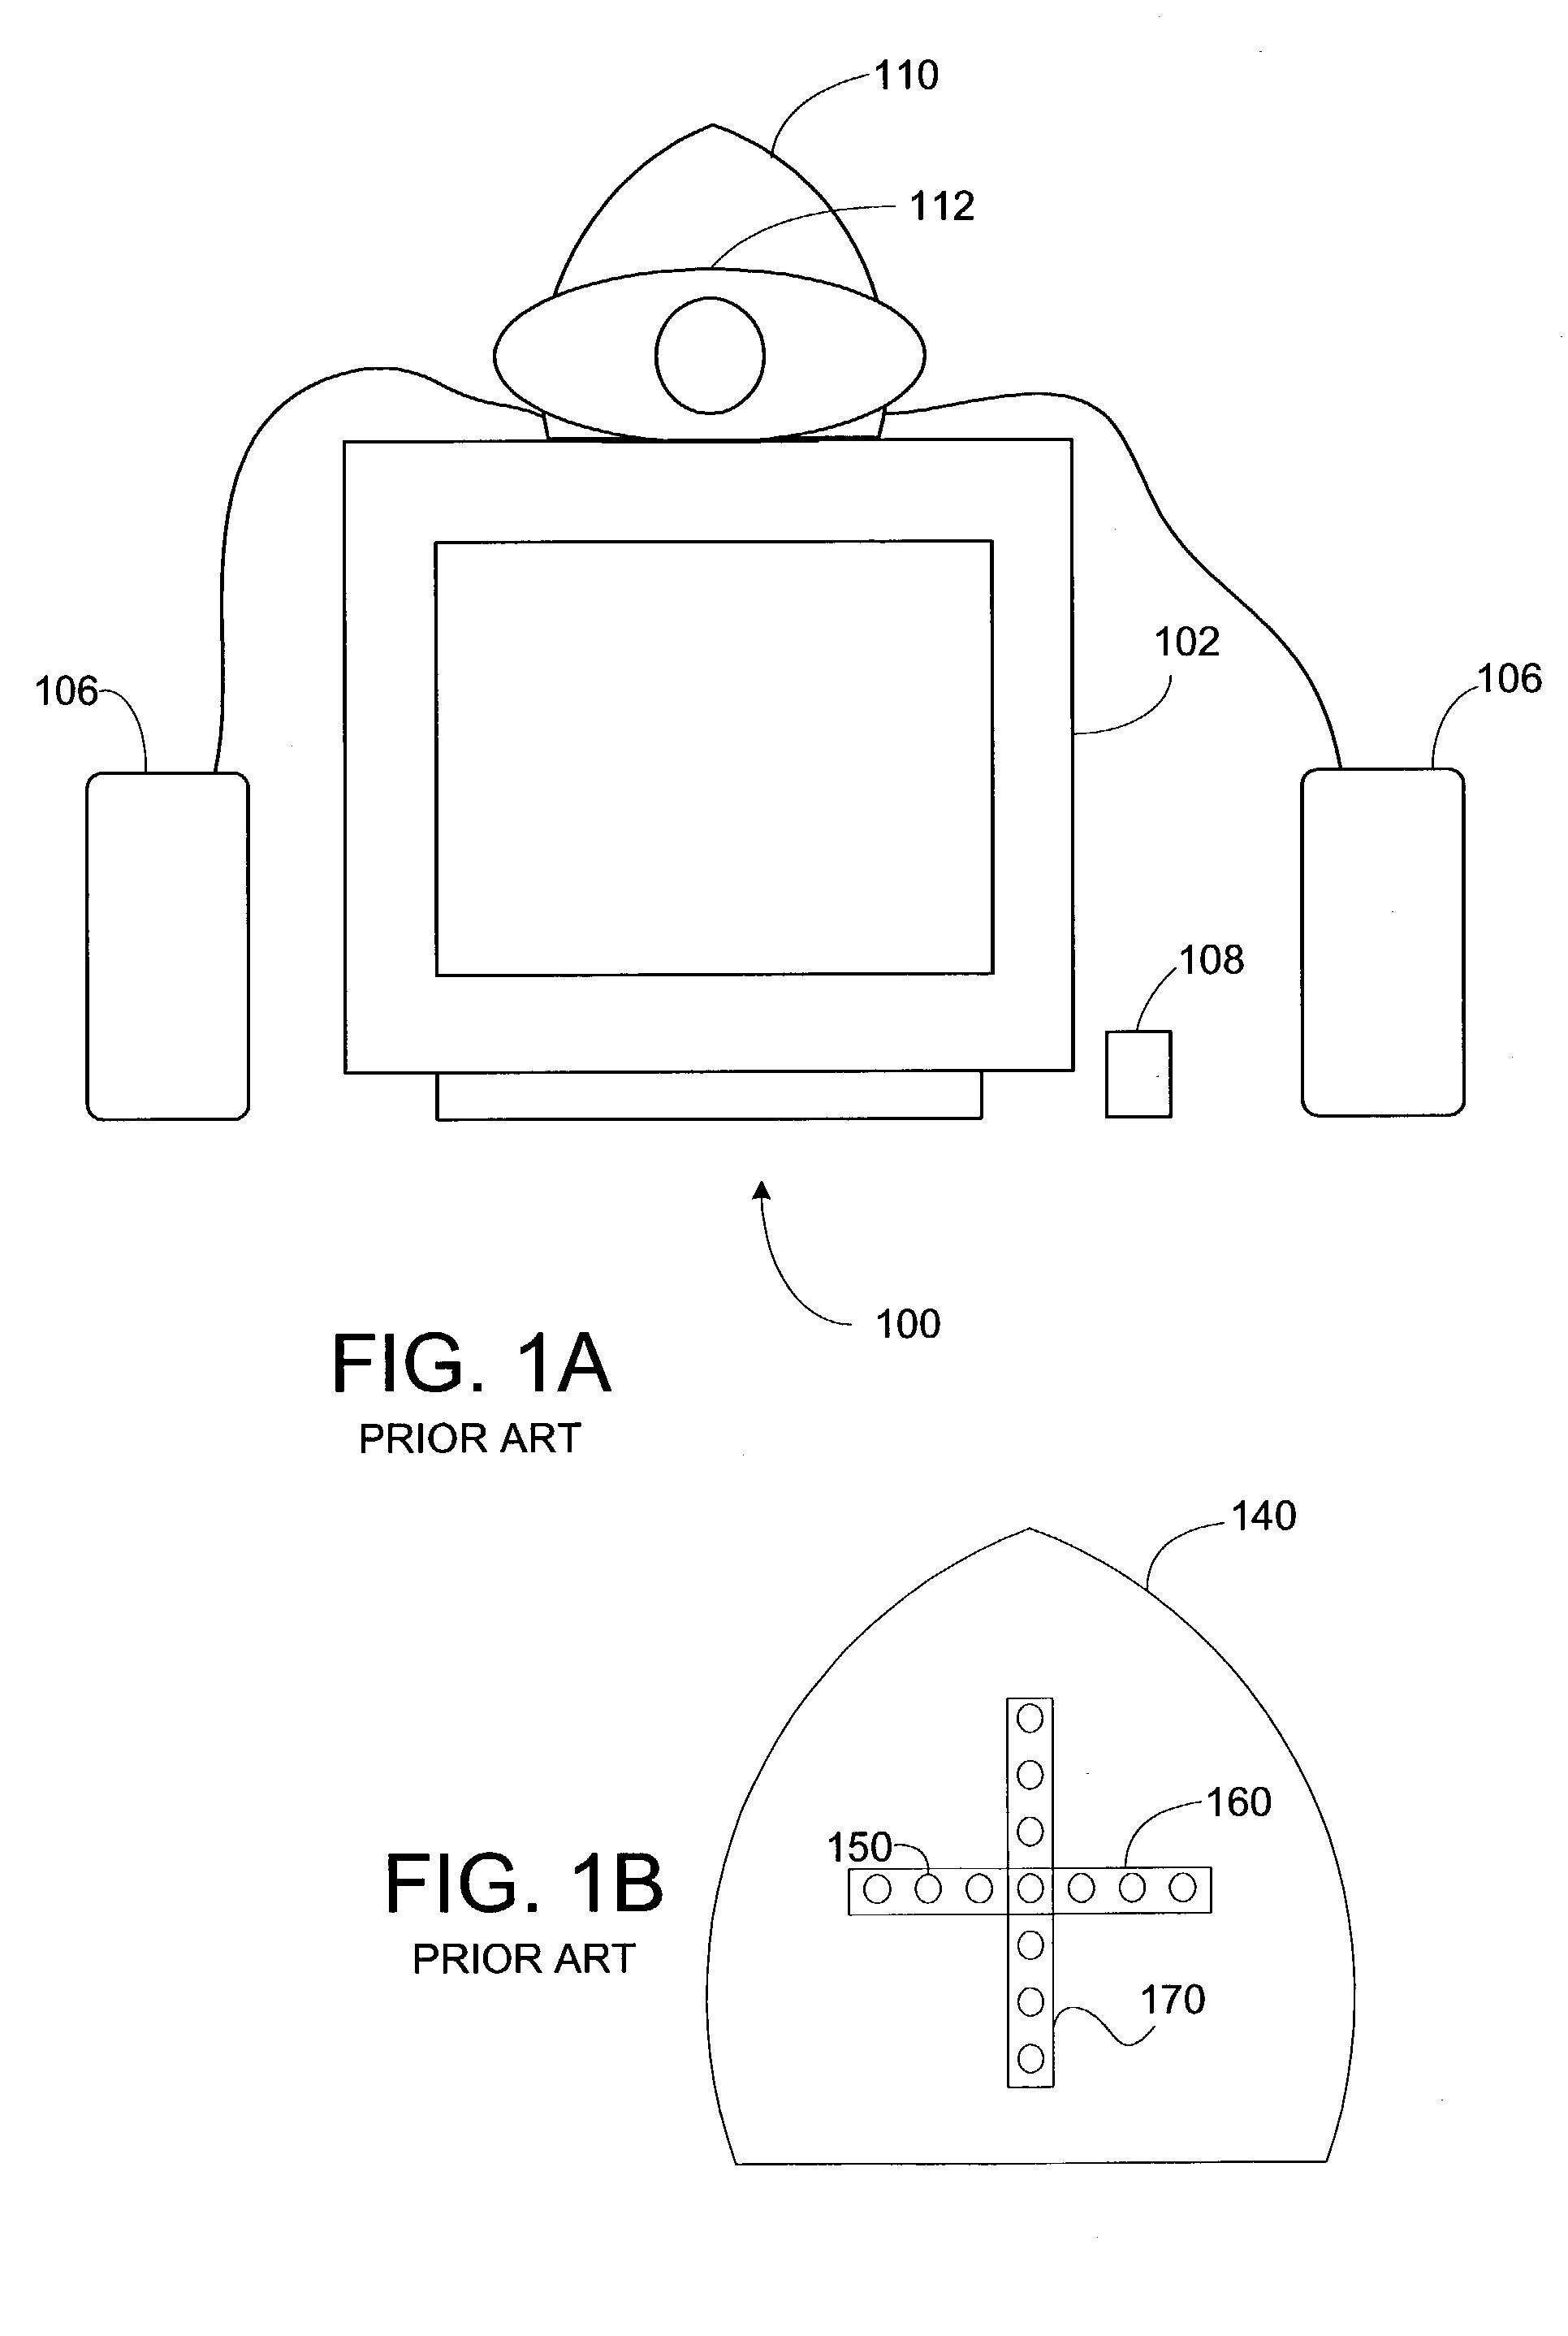 Videoconferencing system with horizontal and vertical microphone arrays